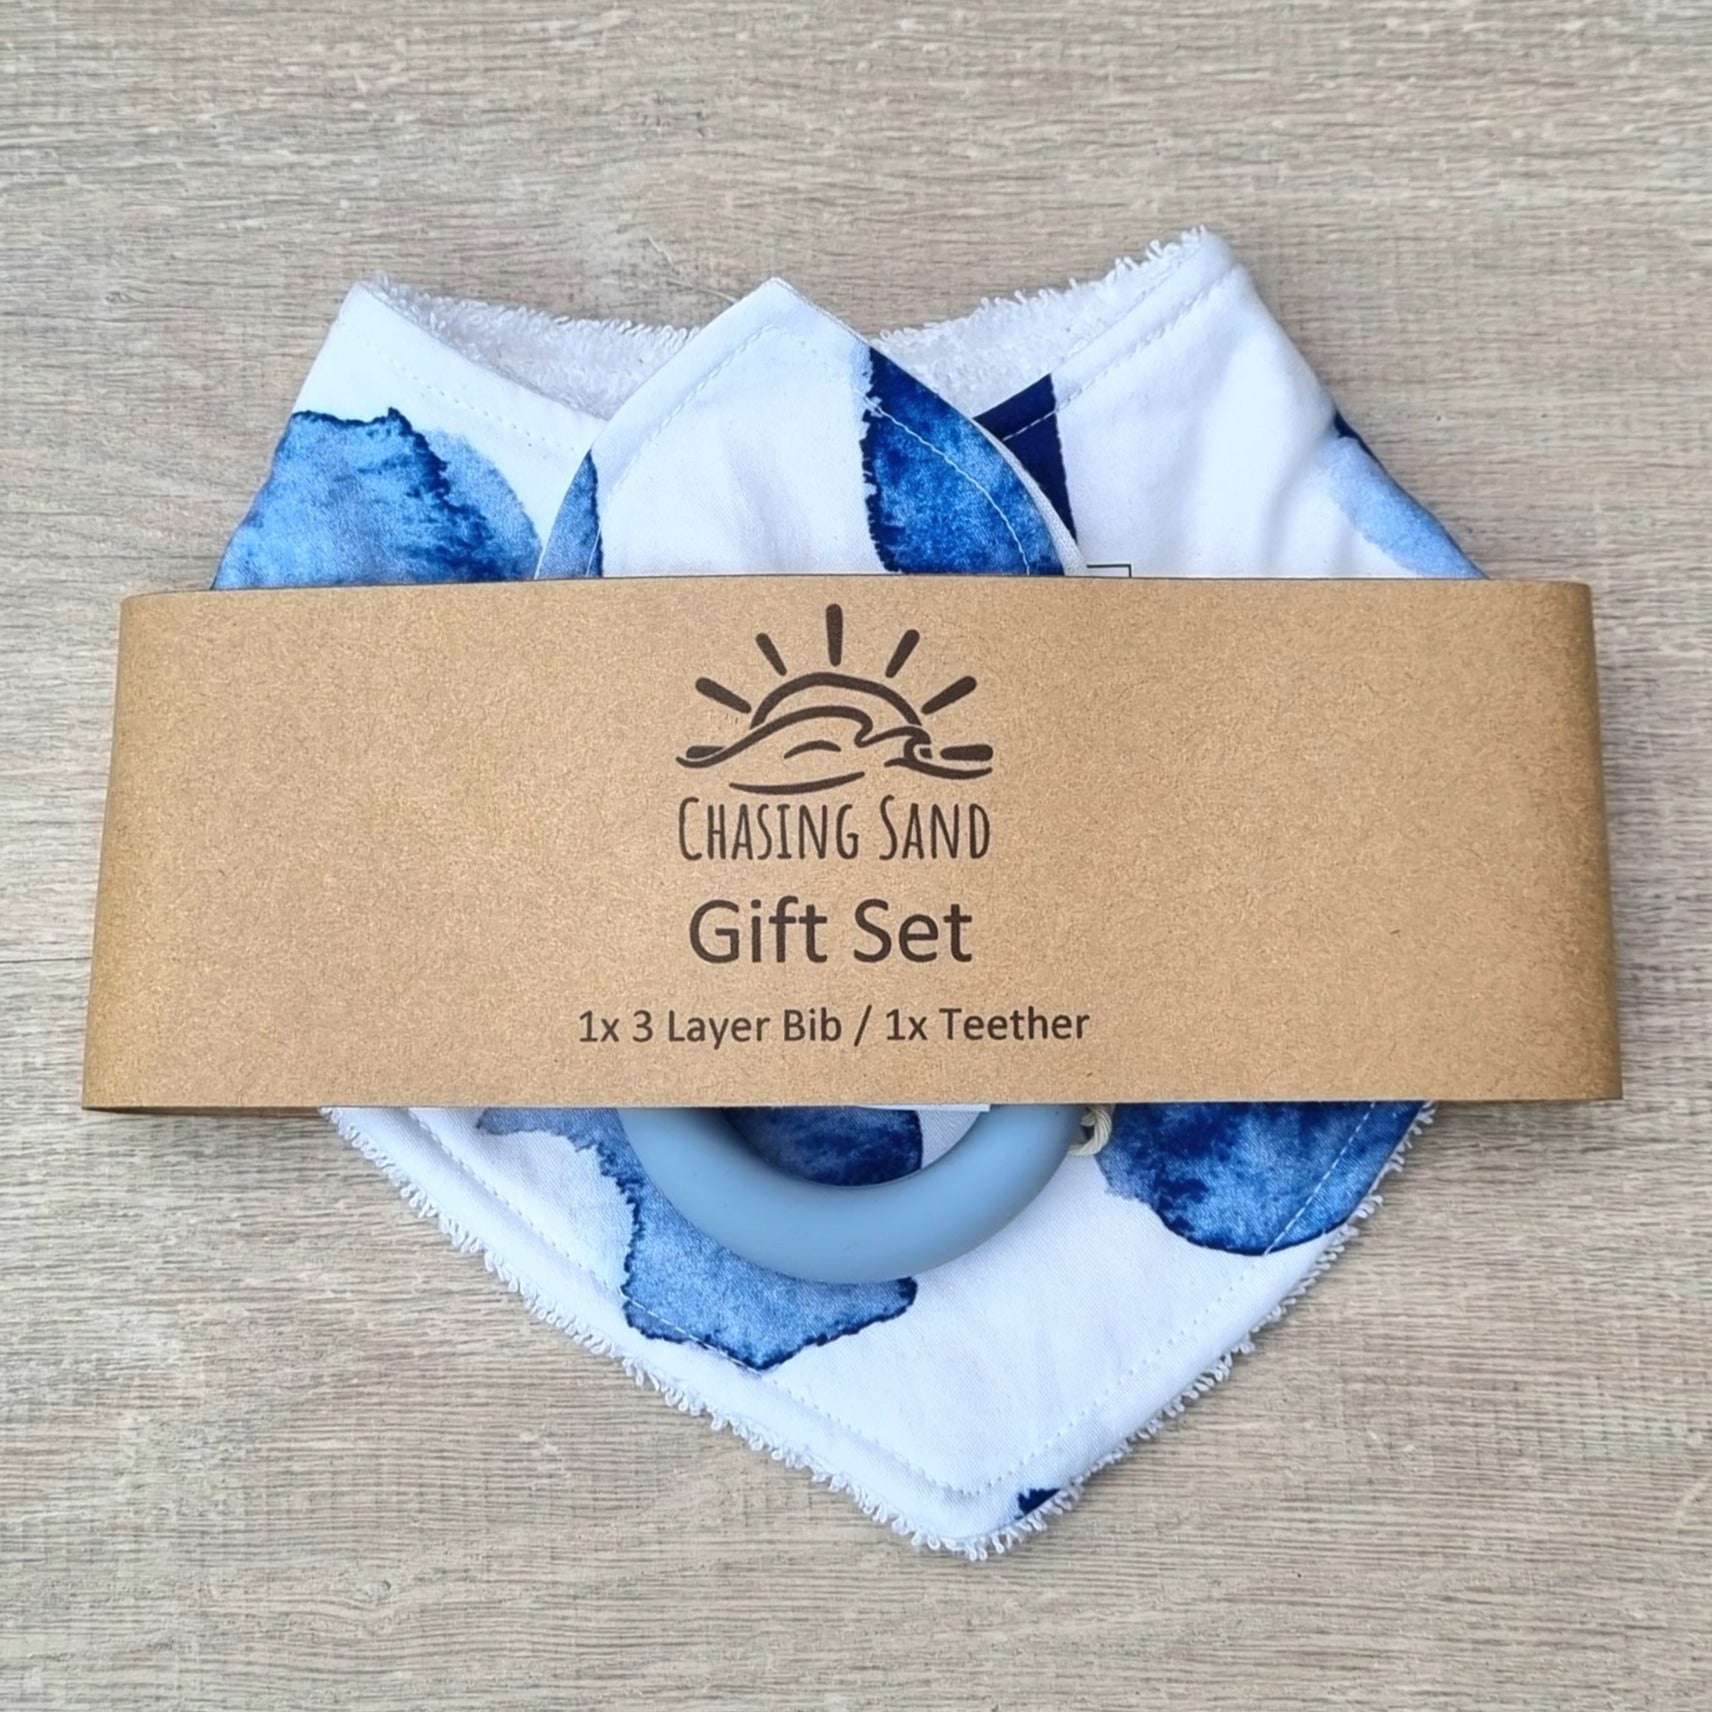 2 Piece Gift Set - Watercolour against wooden backdrop. Blue watercolour patches on white background. Each set contains 1x Dribble Bib and 1x Teether.